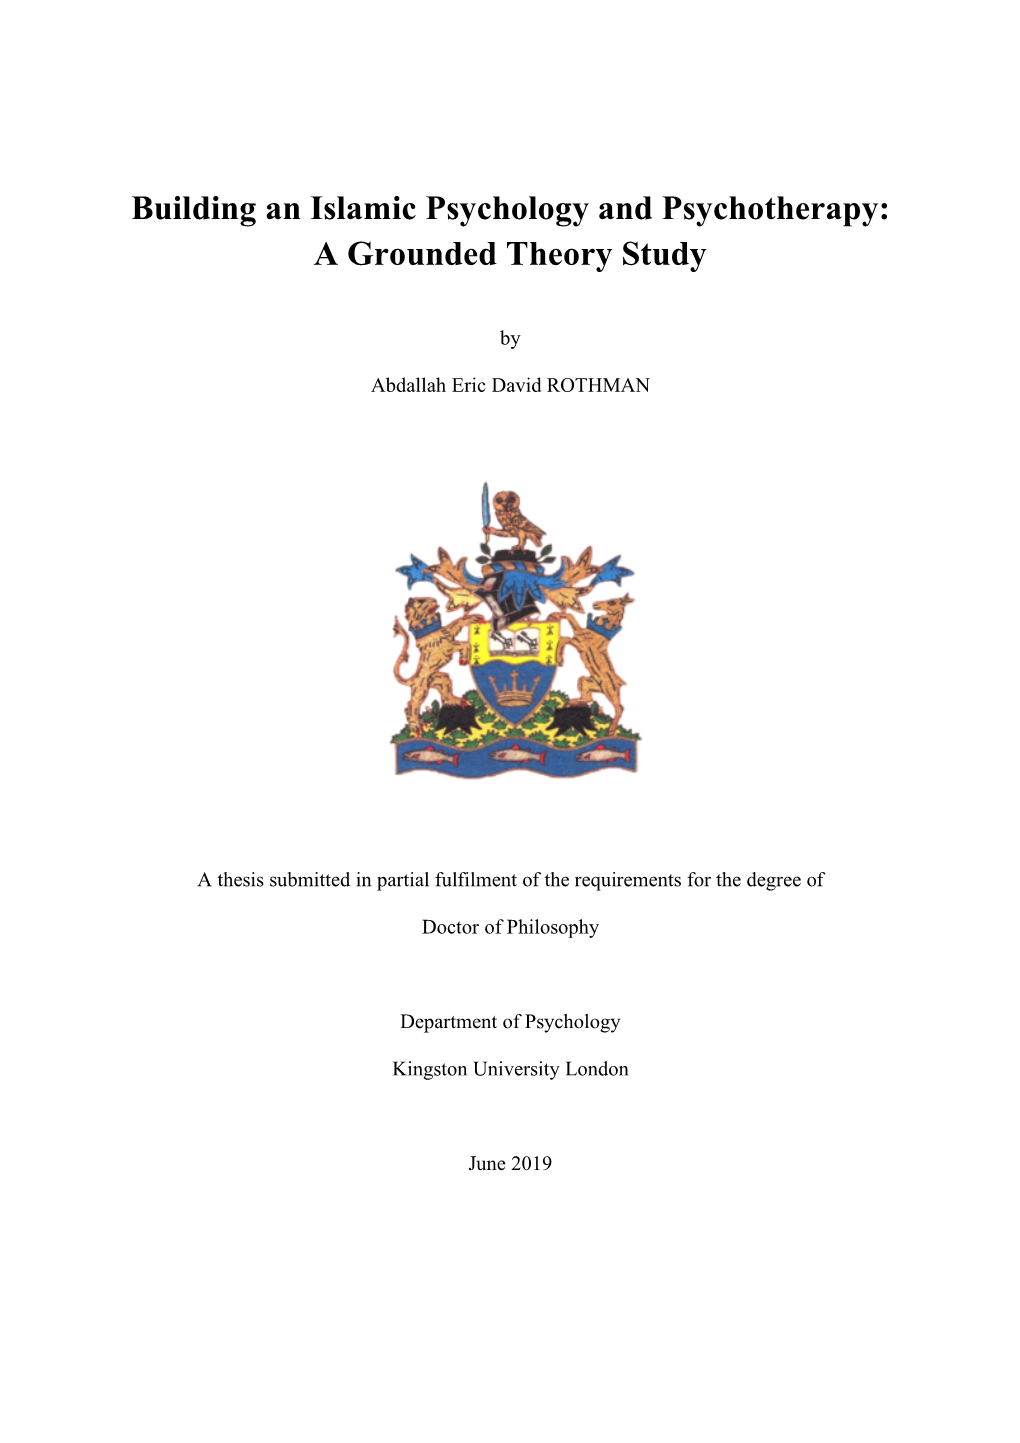 Building an Islamic Psychology and Psychotherapy: a Grounded Theory Study